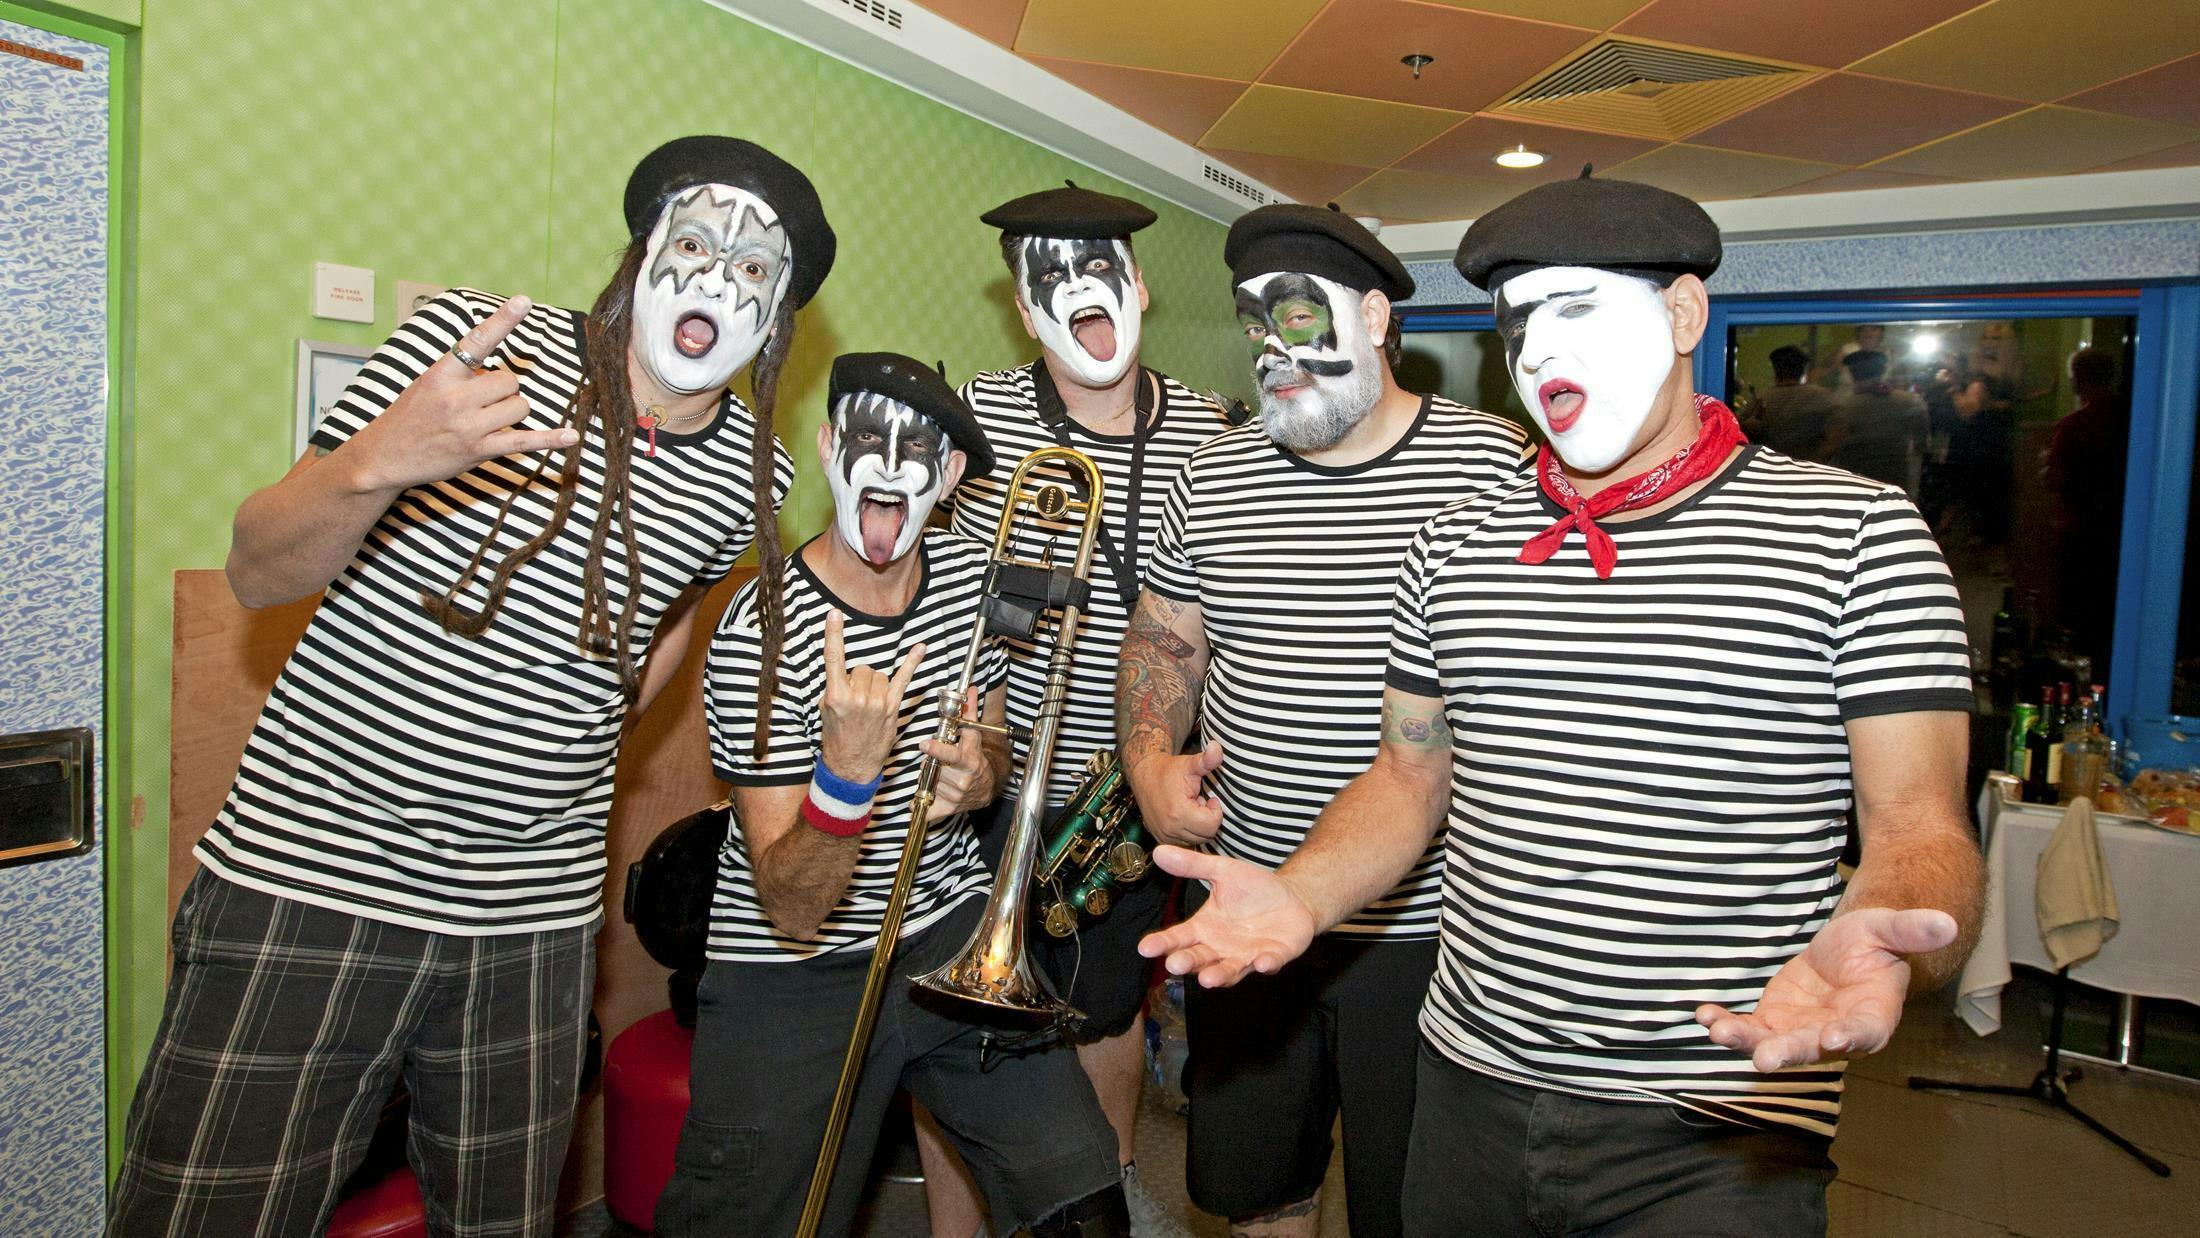 Less Than Jake and crew transform into French Kiss for their performance on the Warped Rewind.